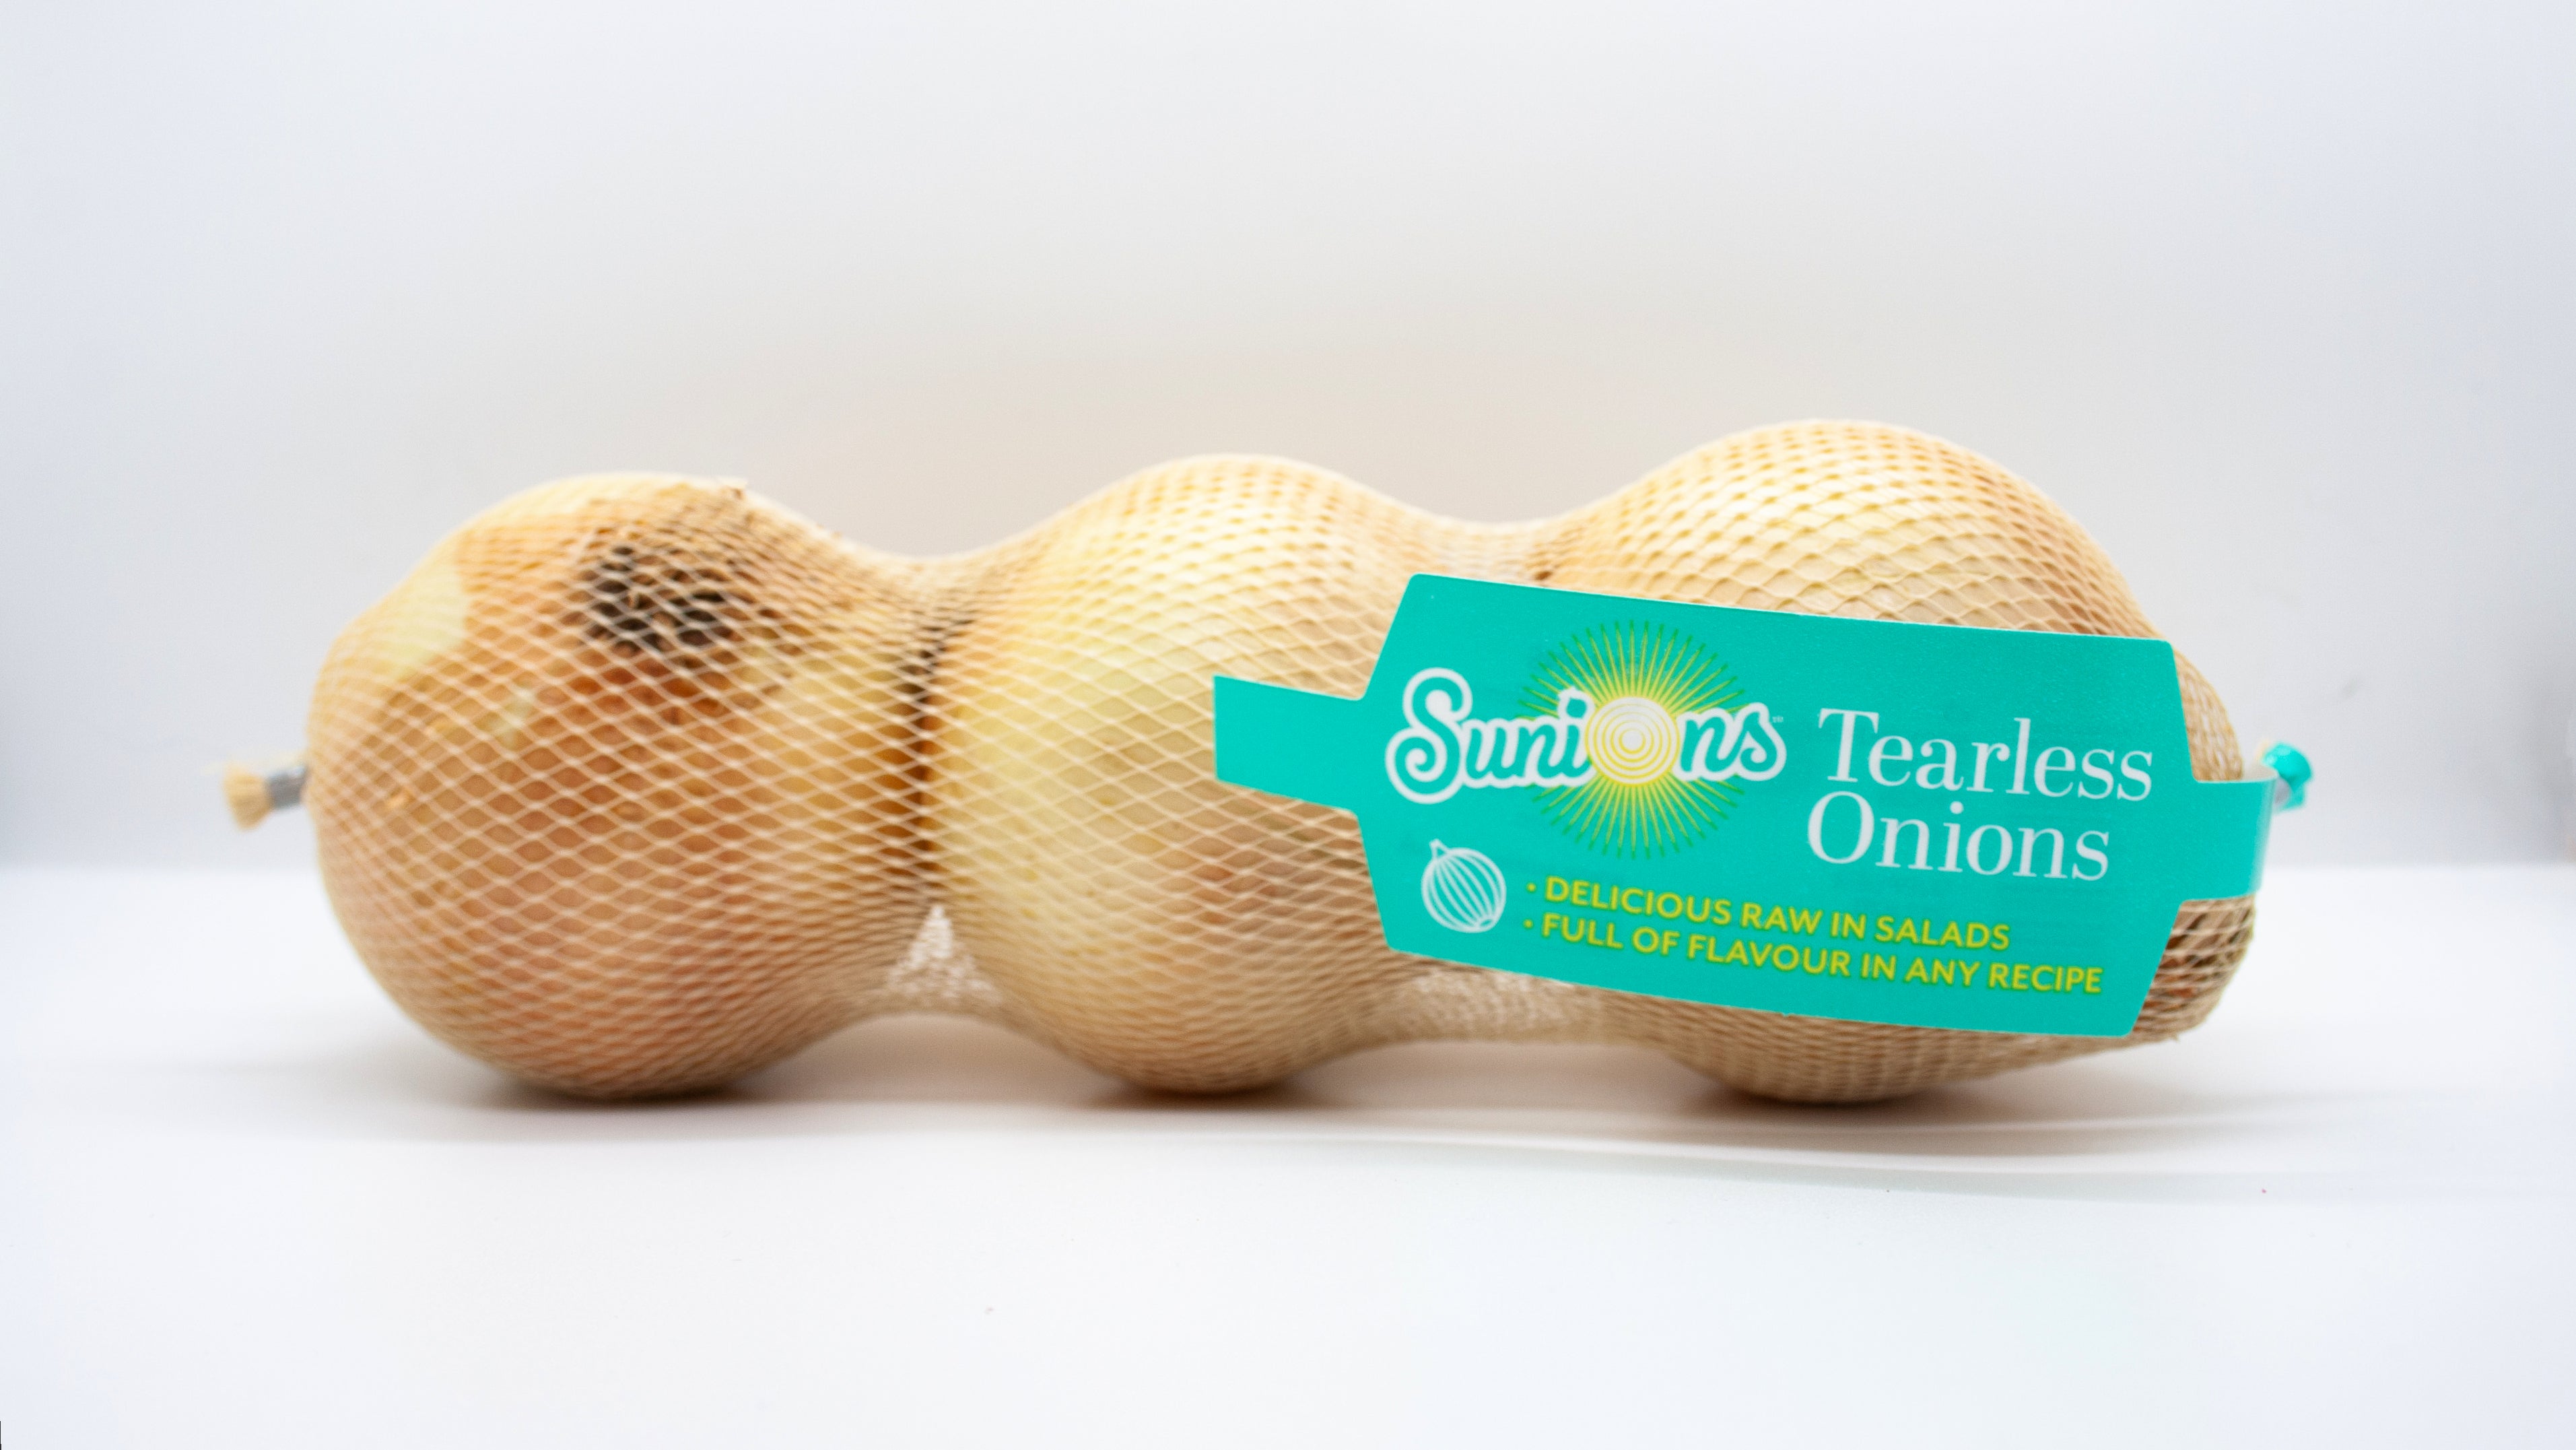 A pack of the tearless onions (Waitrose/PA)